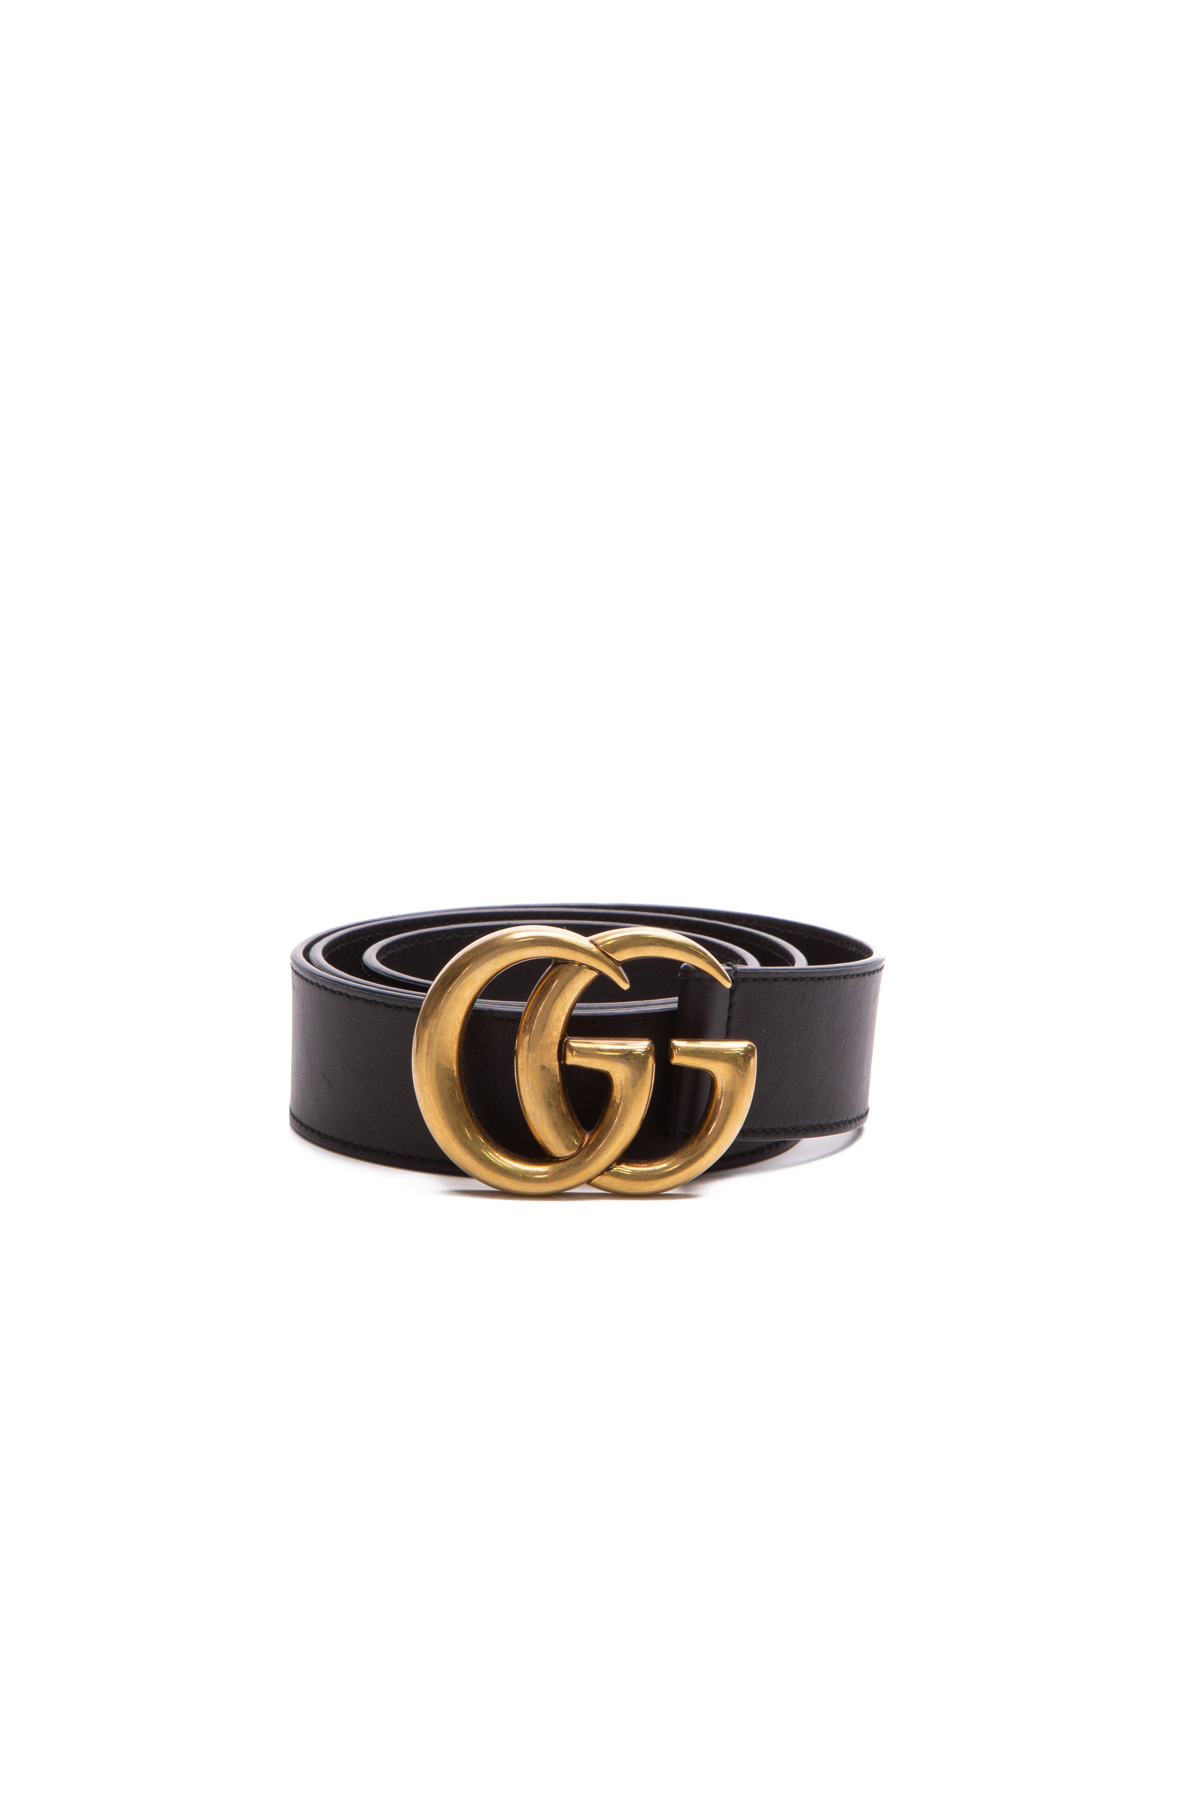 Gucci 1.5" Black Leather Marmont Belt Silver GG Buckle size 80 / 32  Unisex